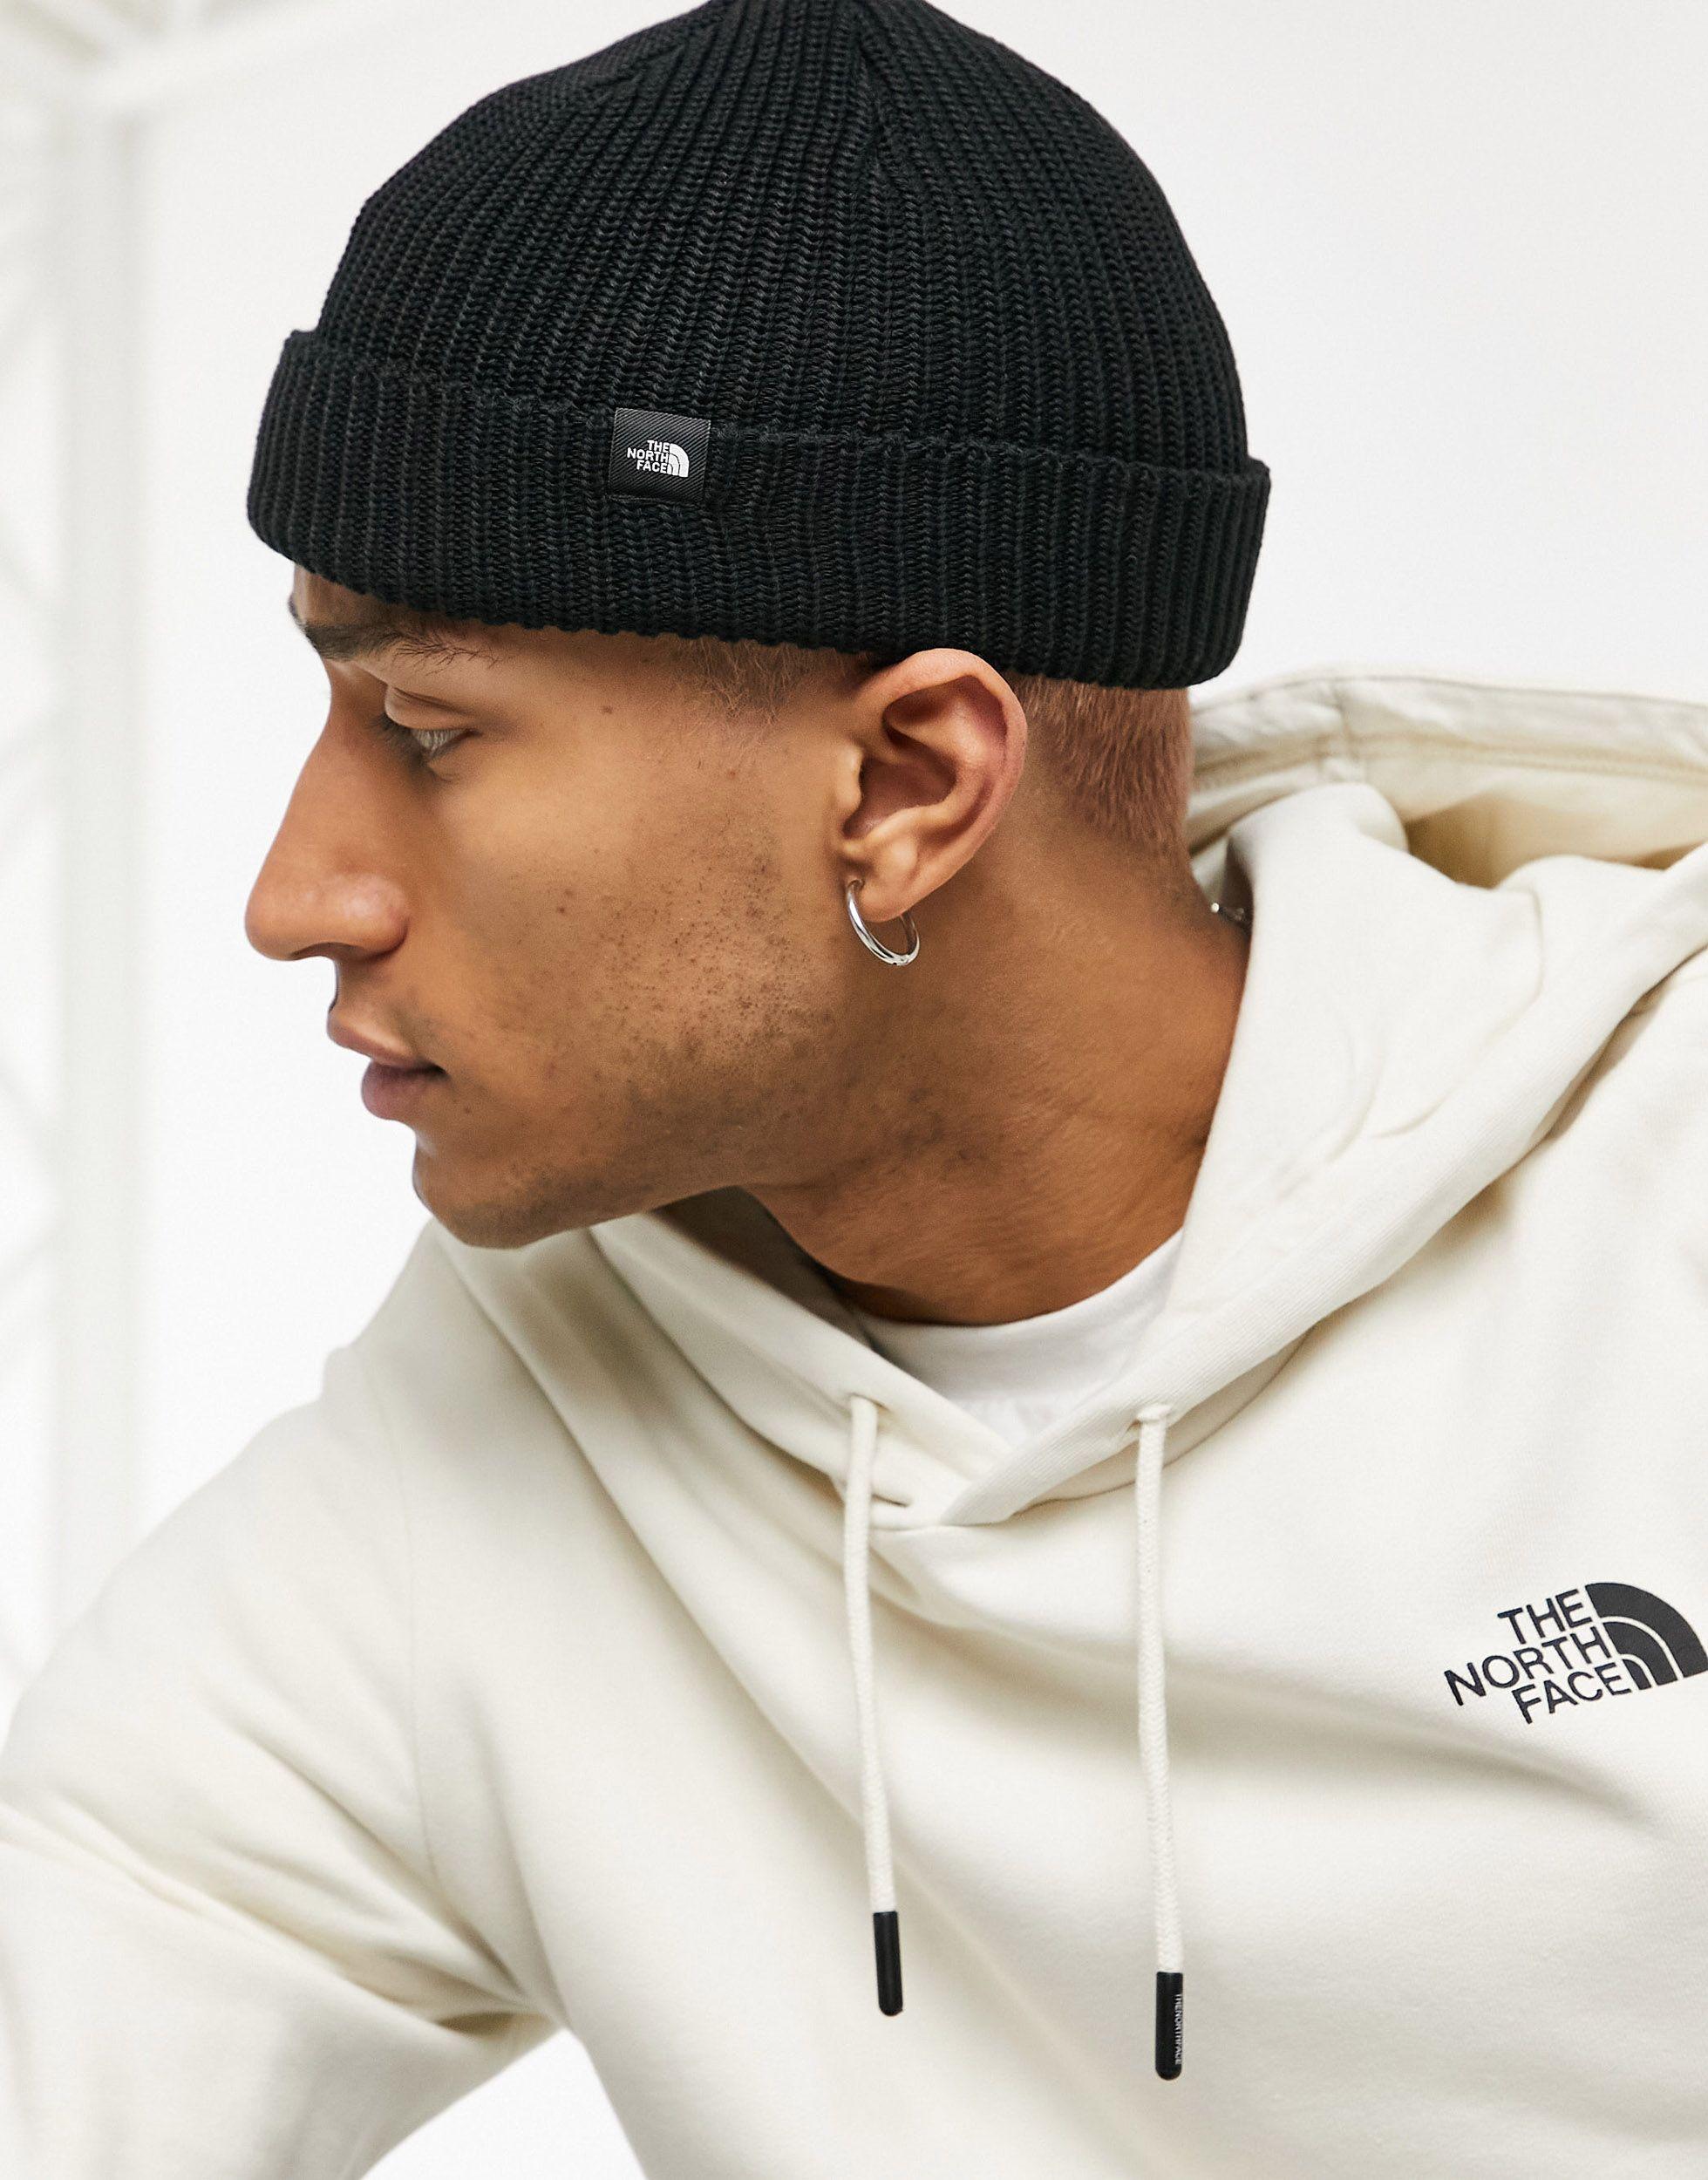 Bonnet North Face Luxembourg, SAVE 48% - trnwired.org